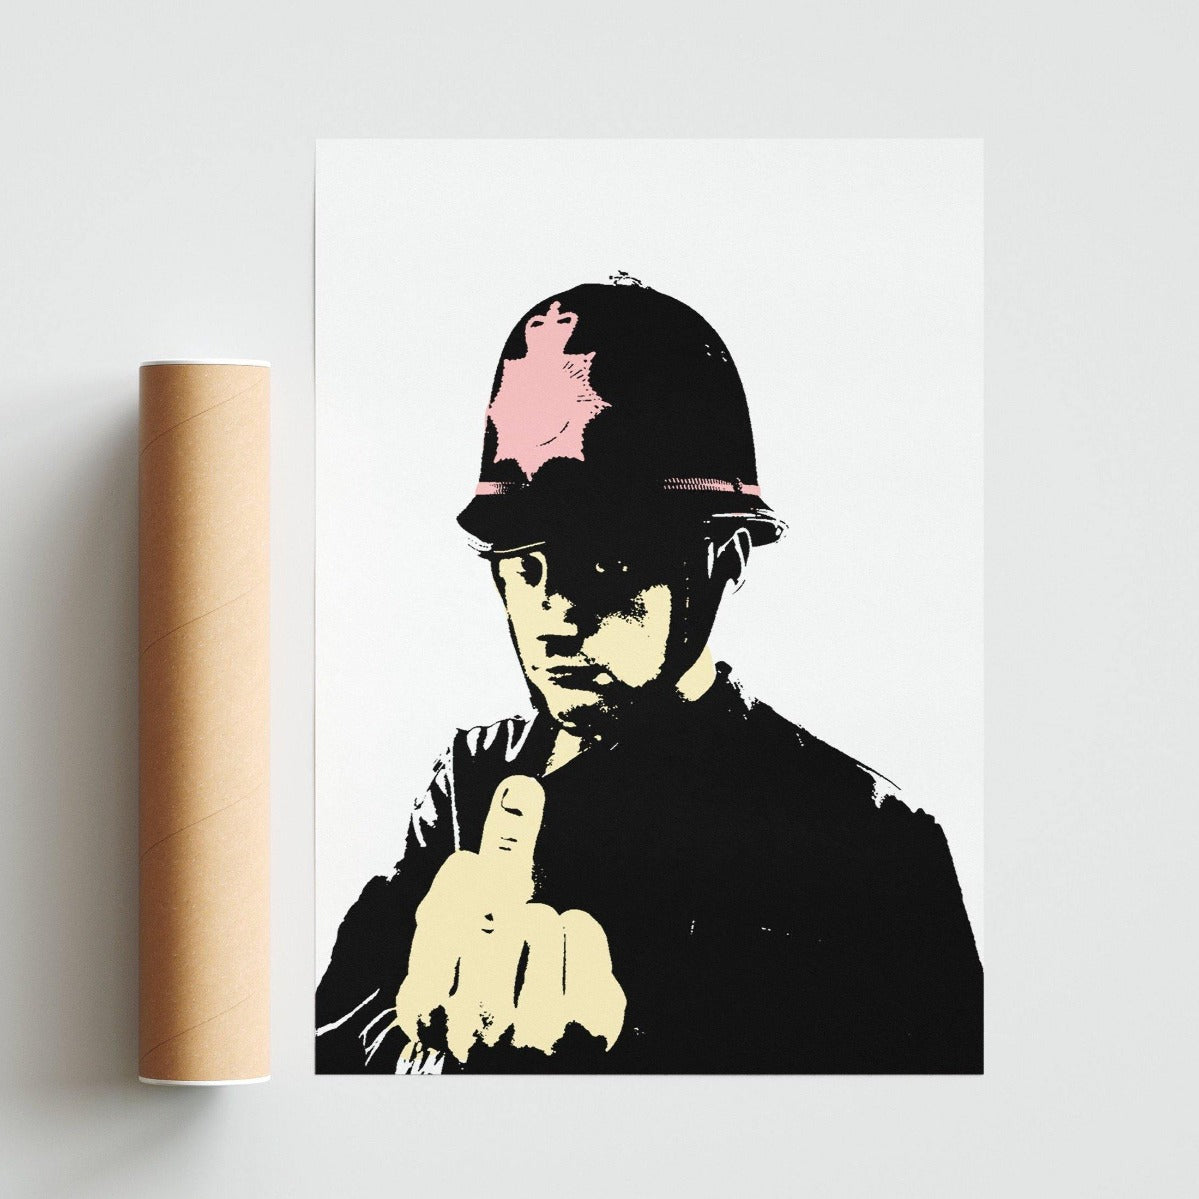 This Banksy Middle Finger Poster Print is the perfect addition to your street art collection. Featuring the iconic street artist's work, this print is sure to add some edge to your décor. Printed on high-quality paper, this poster is sure to make a statement in any room. - 98types